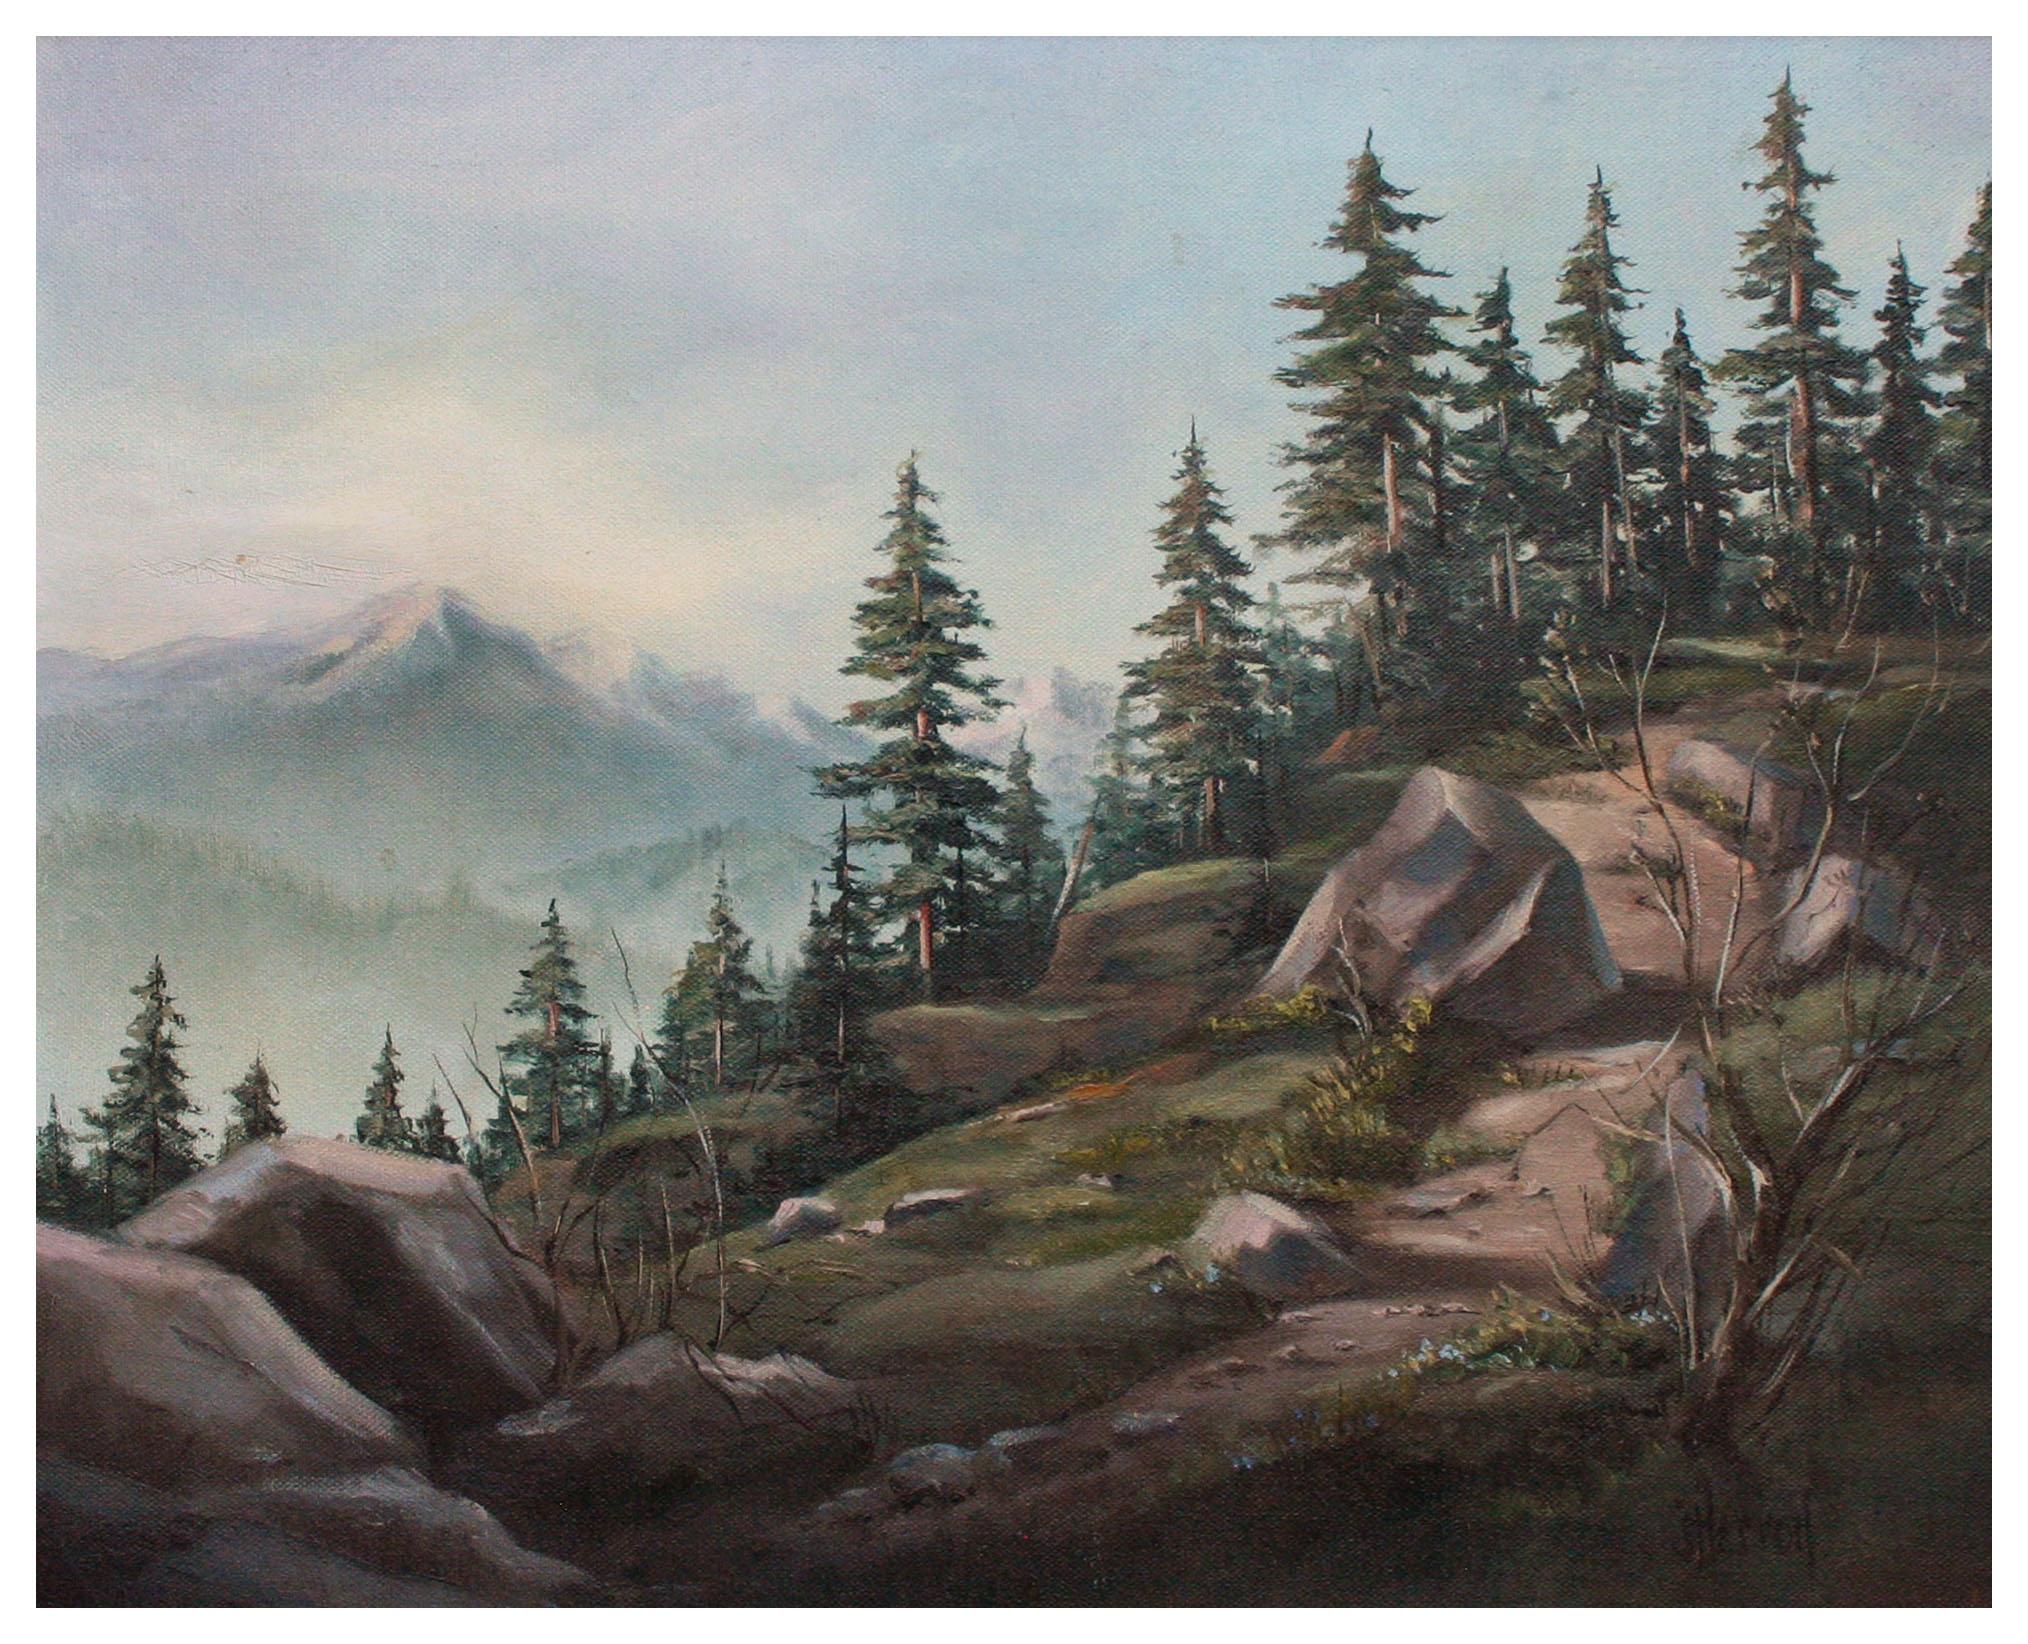 Pacific Northwest Mountain Landscape  - Painting by Jean Herron